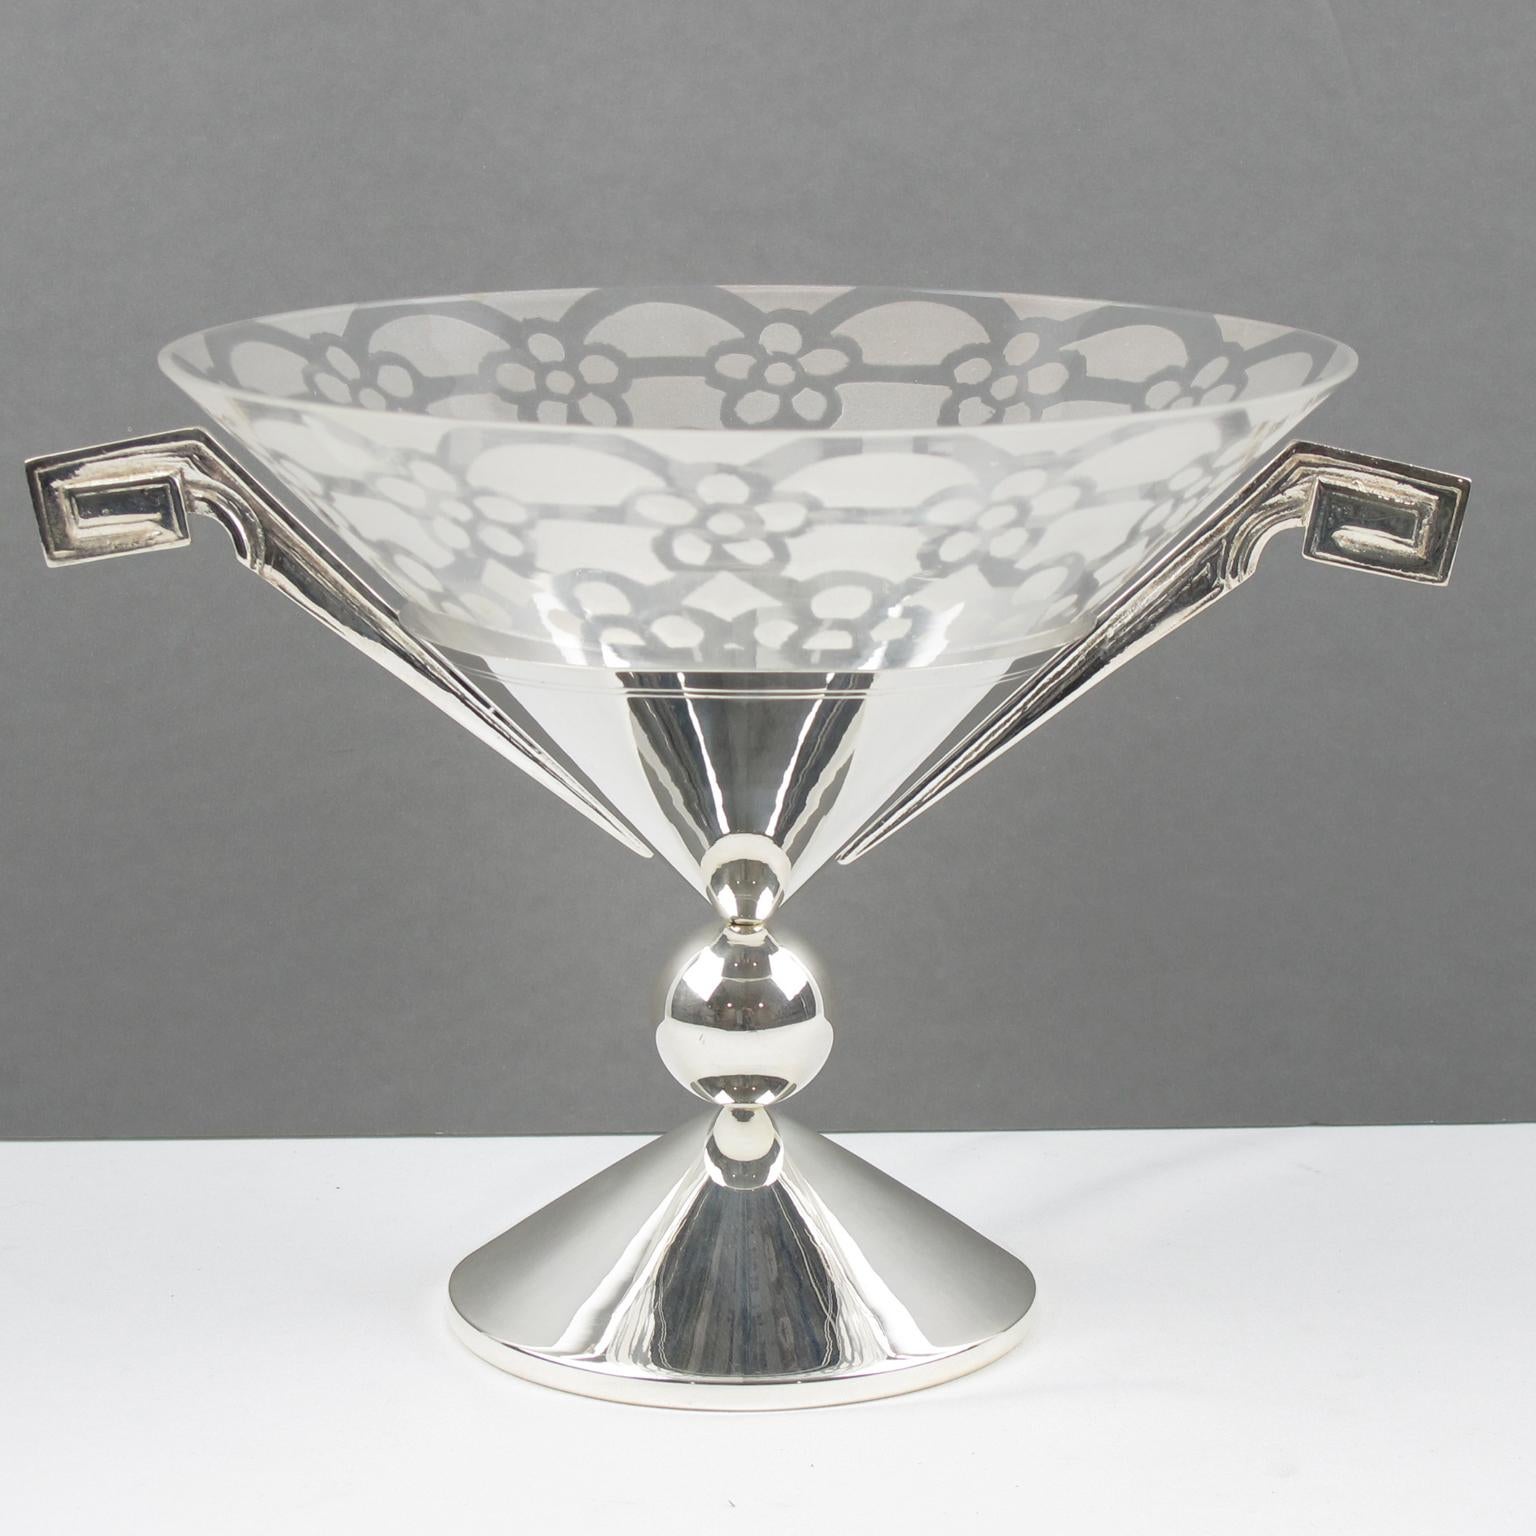 Mid-20th Century French Art Deco Silver Plate and Etched Glass Centerpiece Bowl For Sale